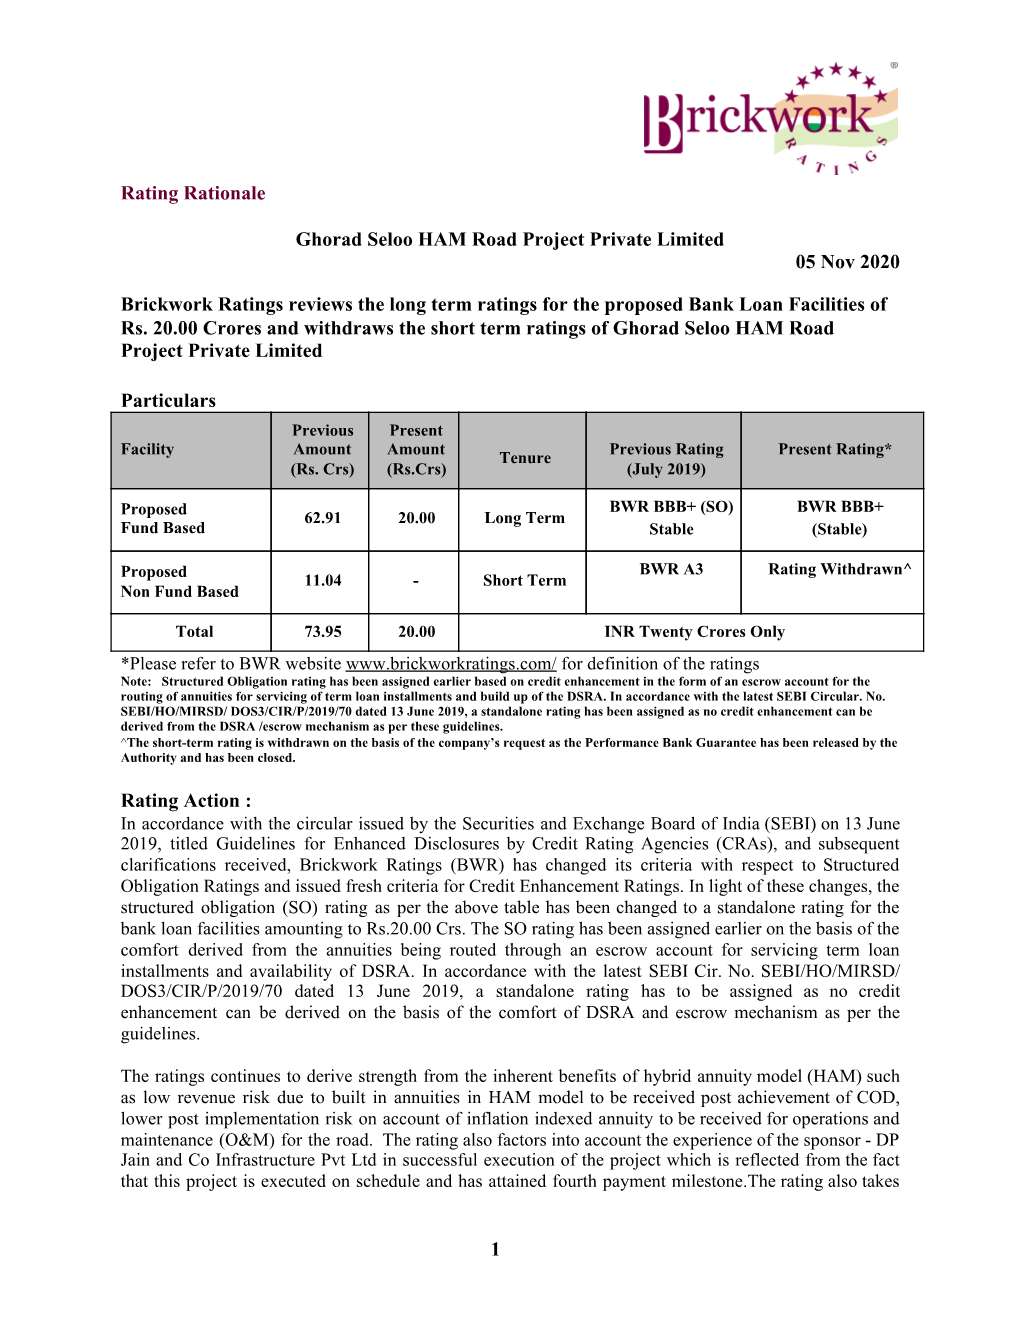 Rating Rationale Ghorad Seloo HAM Road Project Private Limited 05 Nov 2020 Brickwork Ratings Reviews the Long Term Ratings